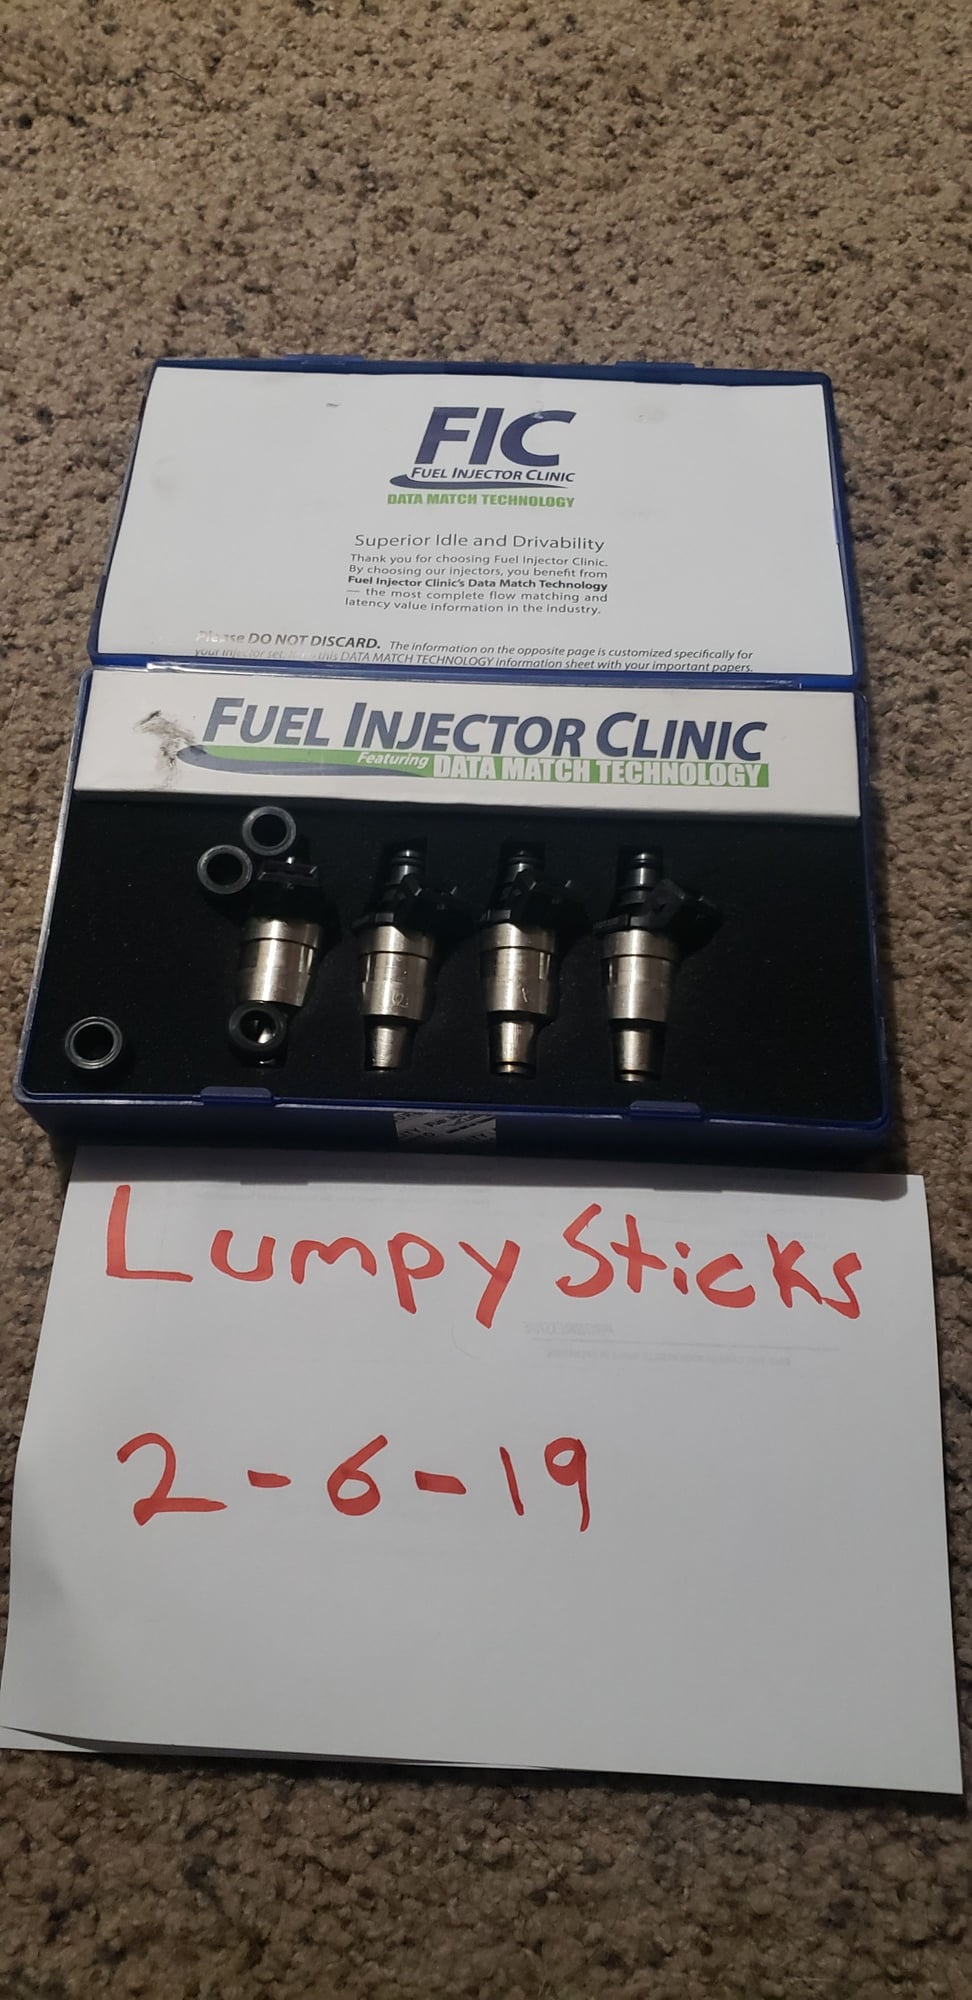 Engine - Intake/Fuel - FIC 1220 low z injectors - used for 500 miles / 1 month old - New - San Bernardino, CA 92407, United States